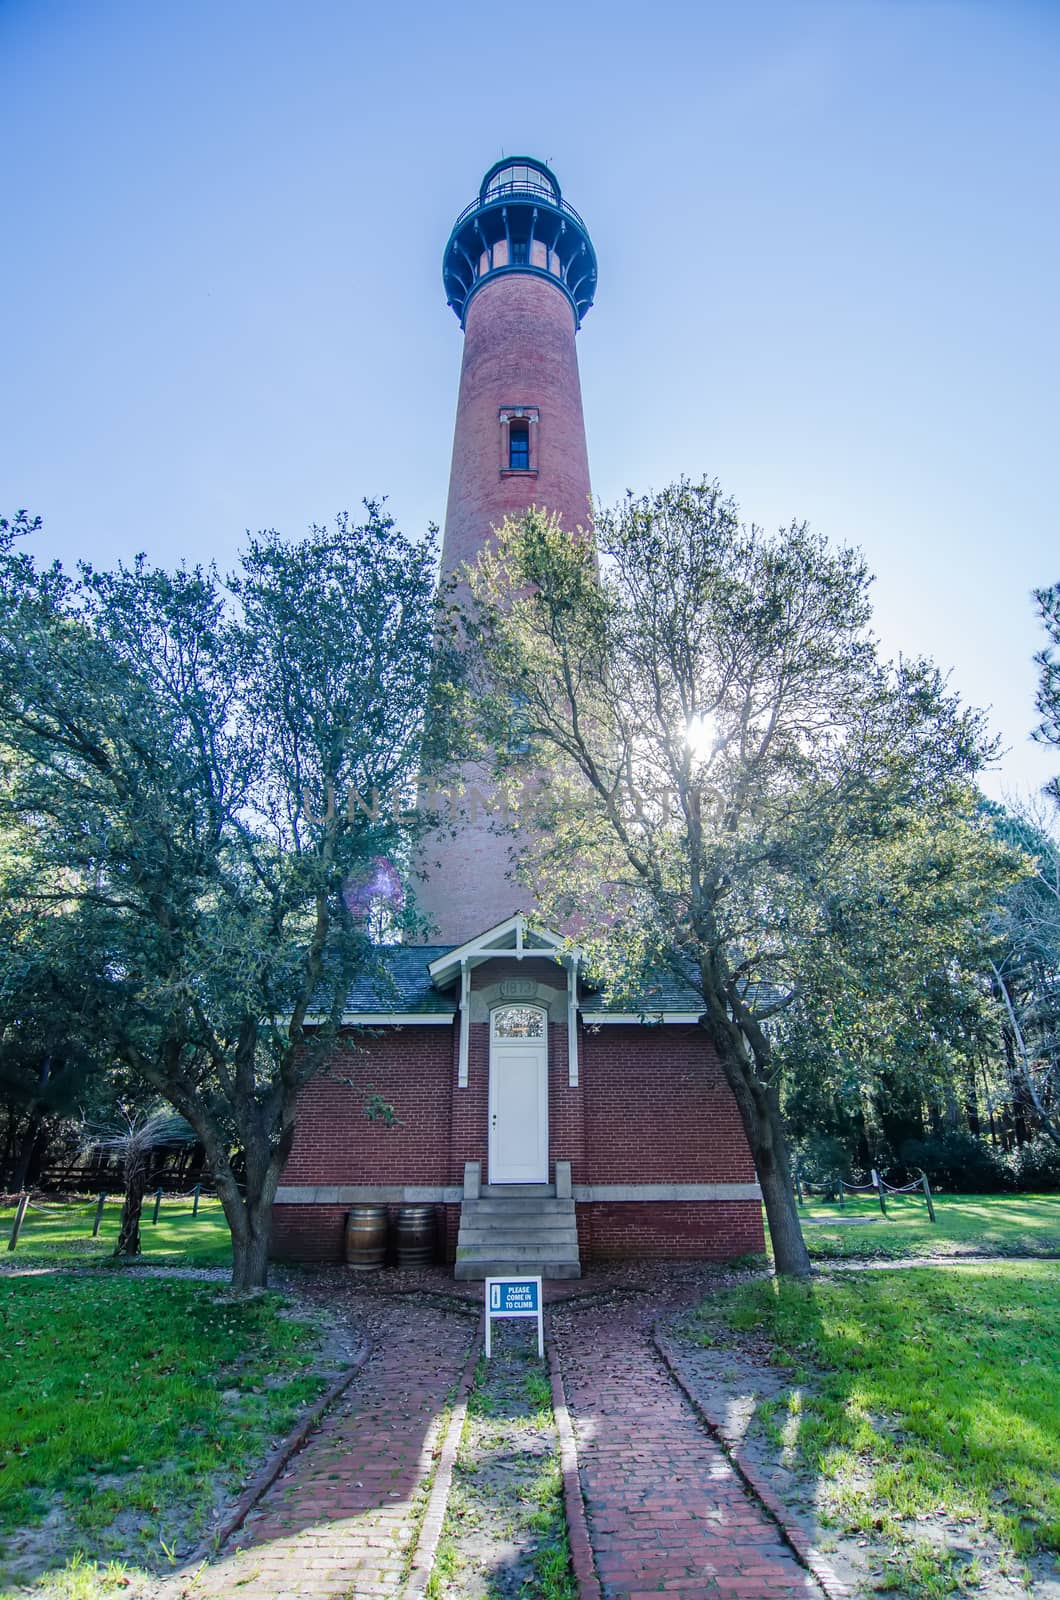 Currituck Beach Lighthouse on the Outer Banks of North Carolina by digidreamgrafix